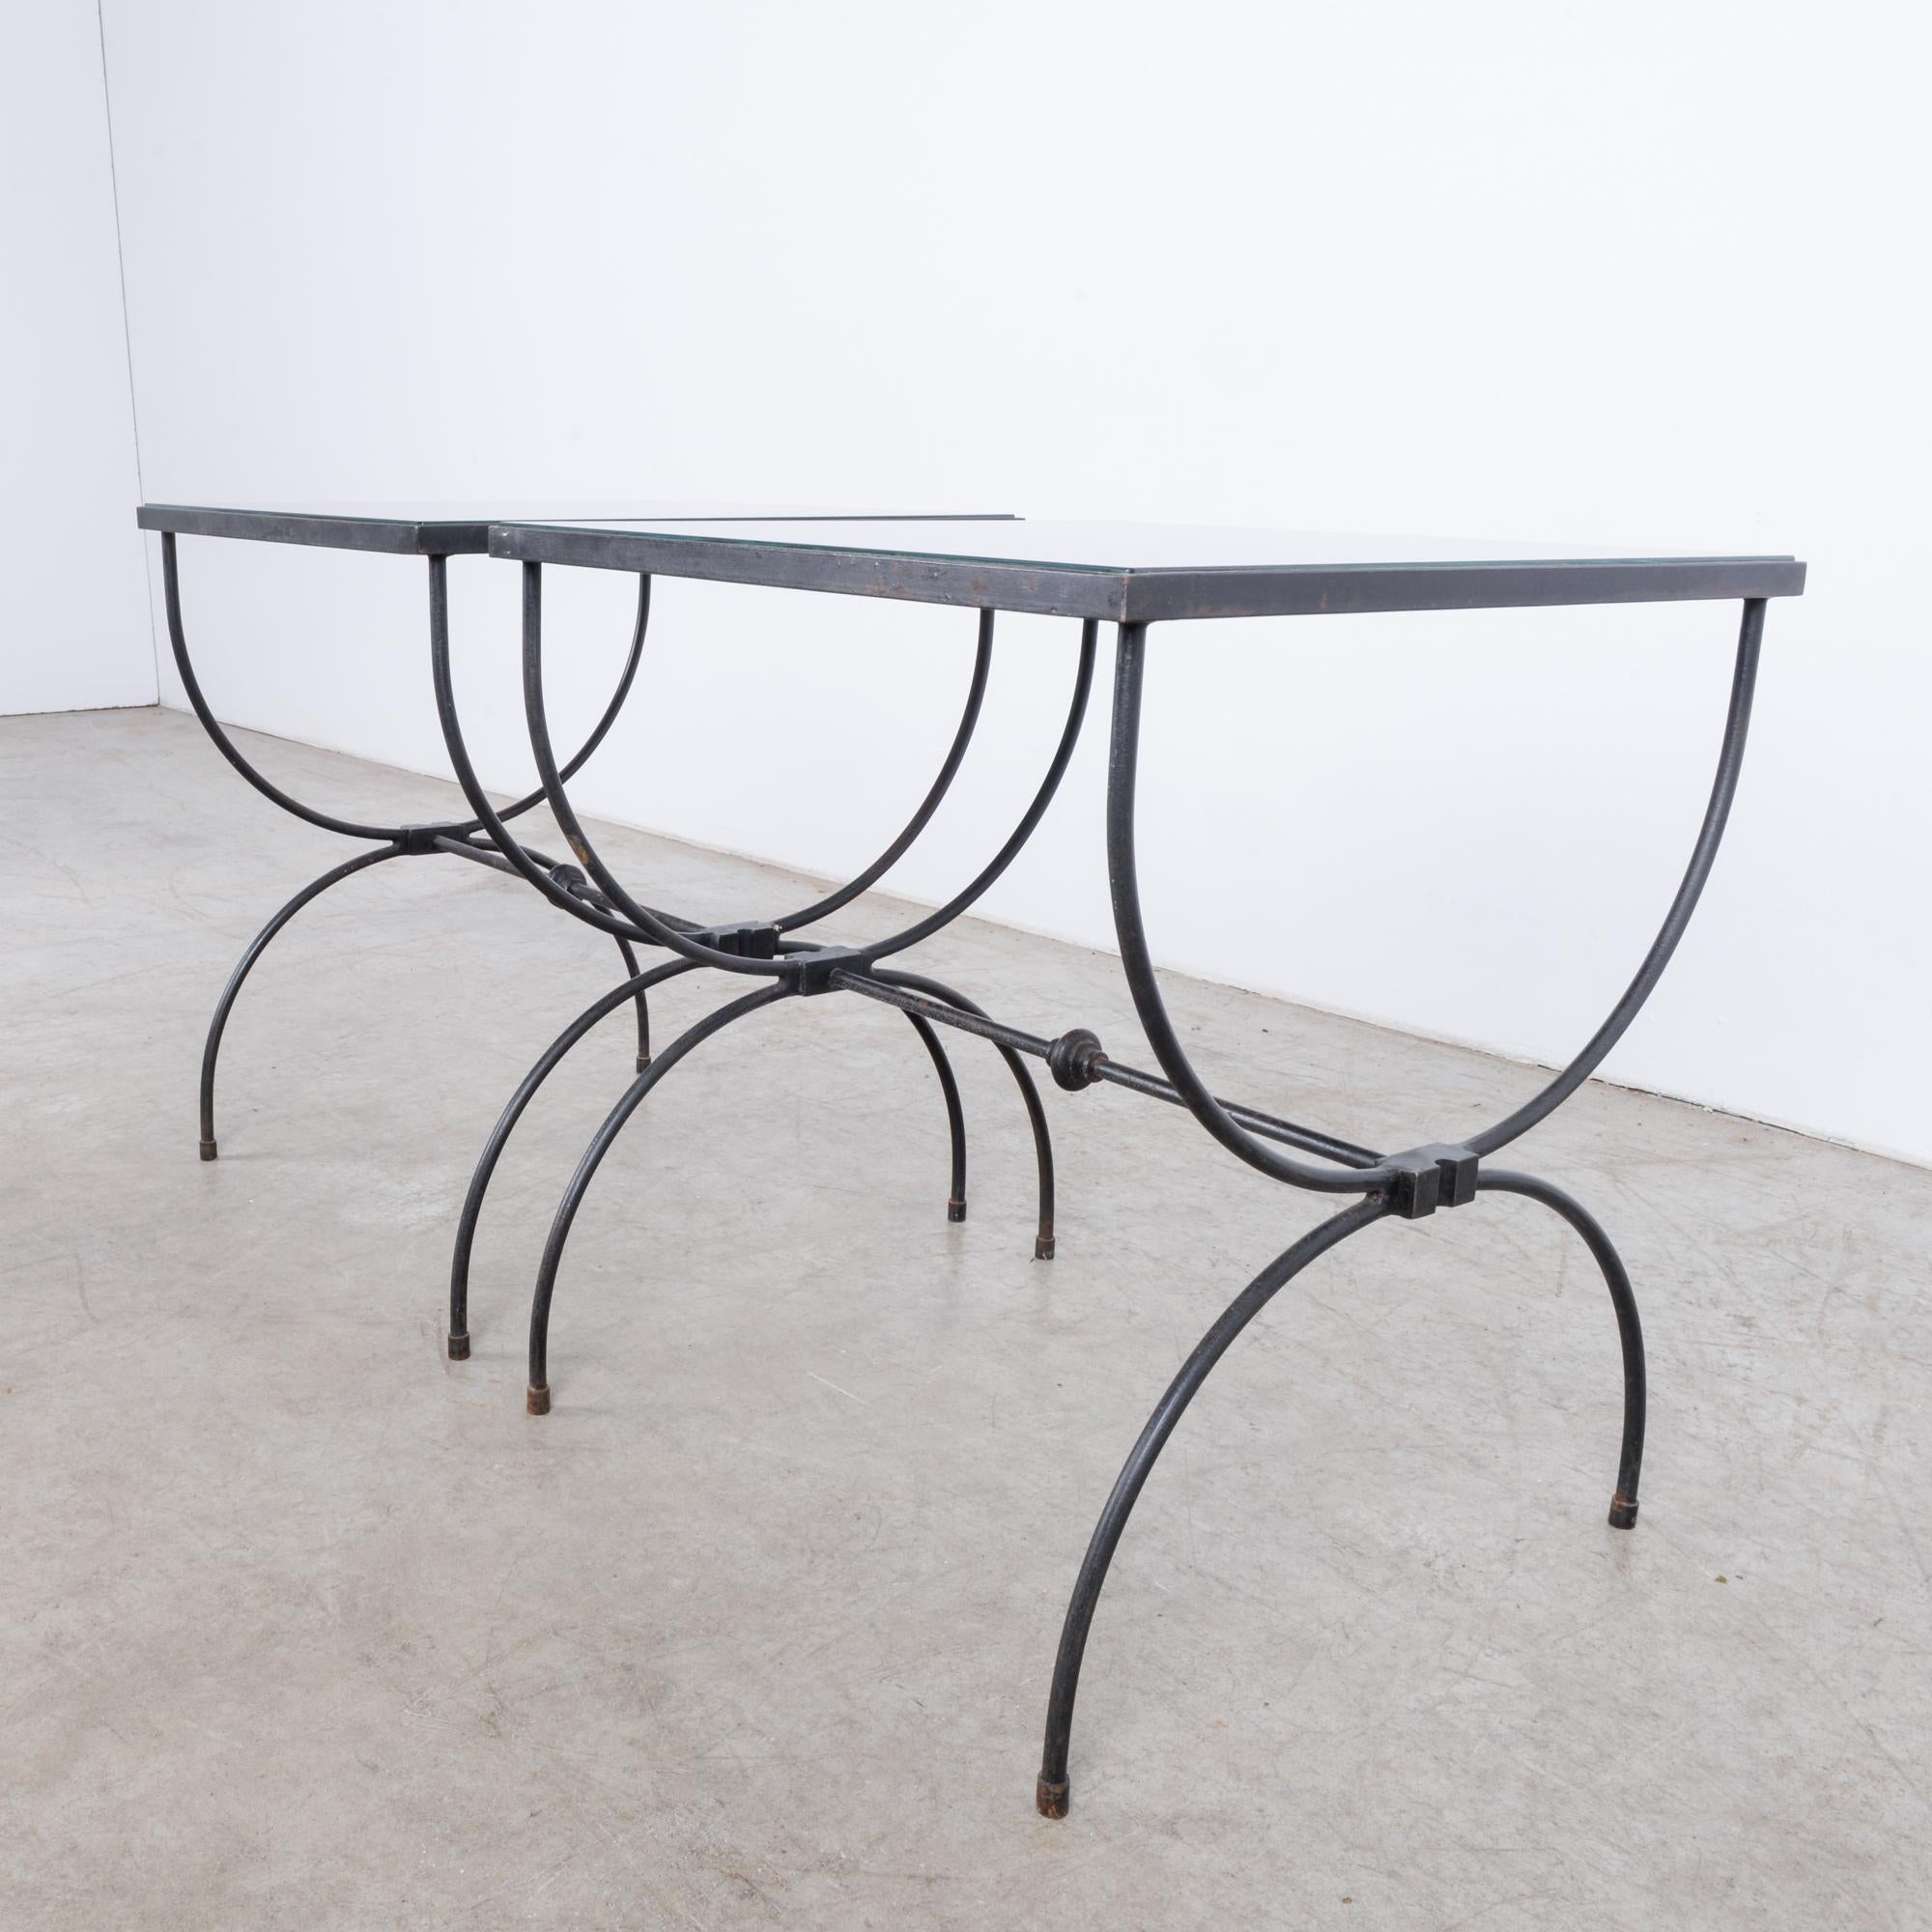 Mid-20th Century Midcentury Belgian Metal and Glass Coffee Tables, a Pair